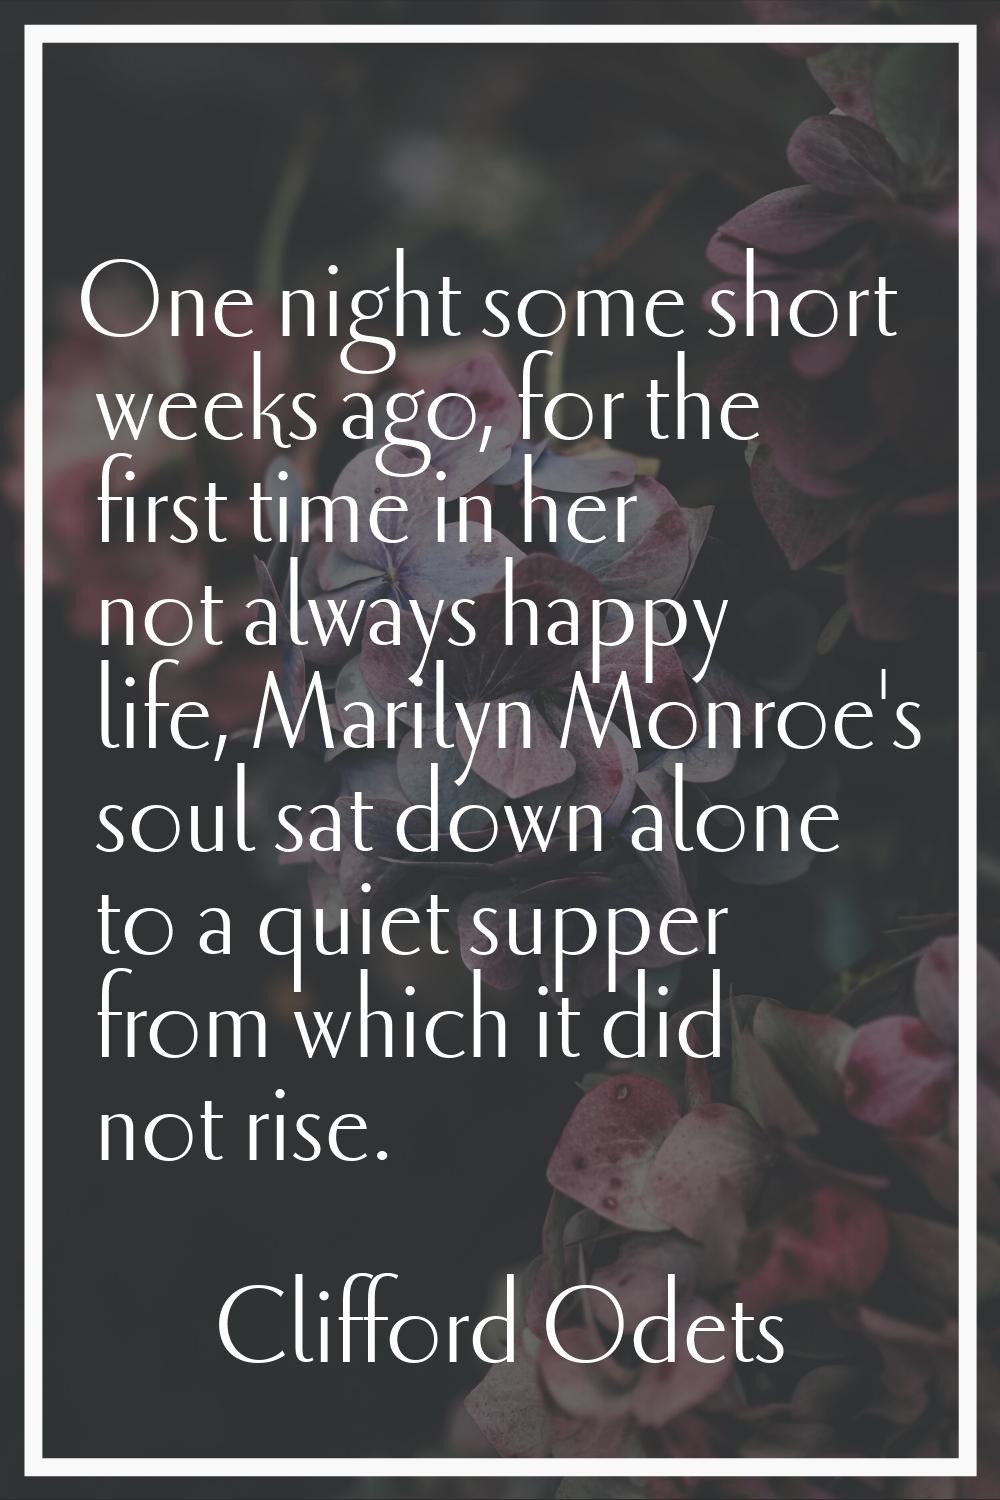 One night some short weeks ago, for the first time in her not always happy life, Marilyn Monroe's s